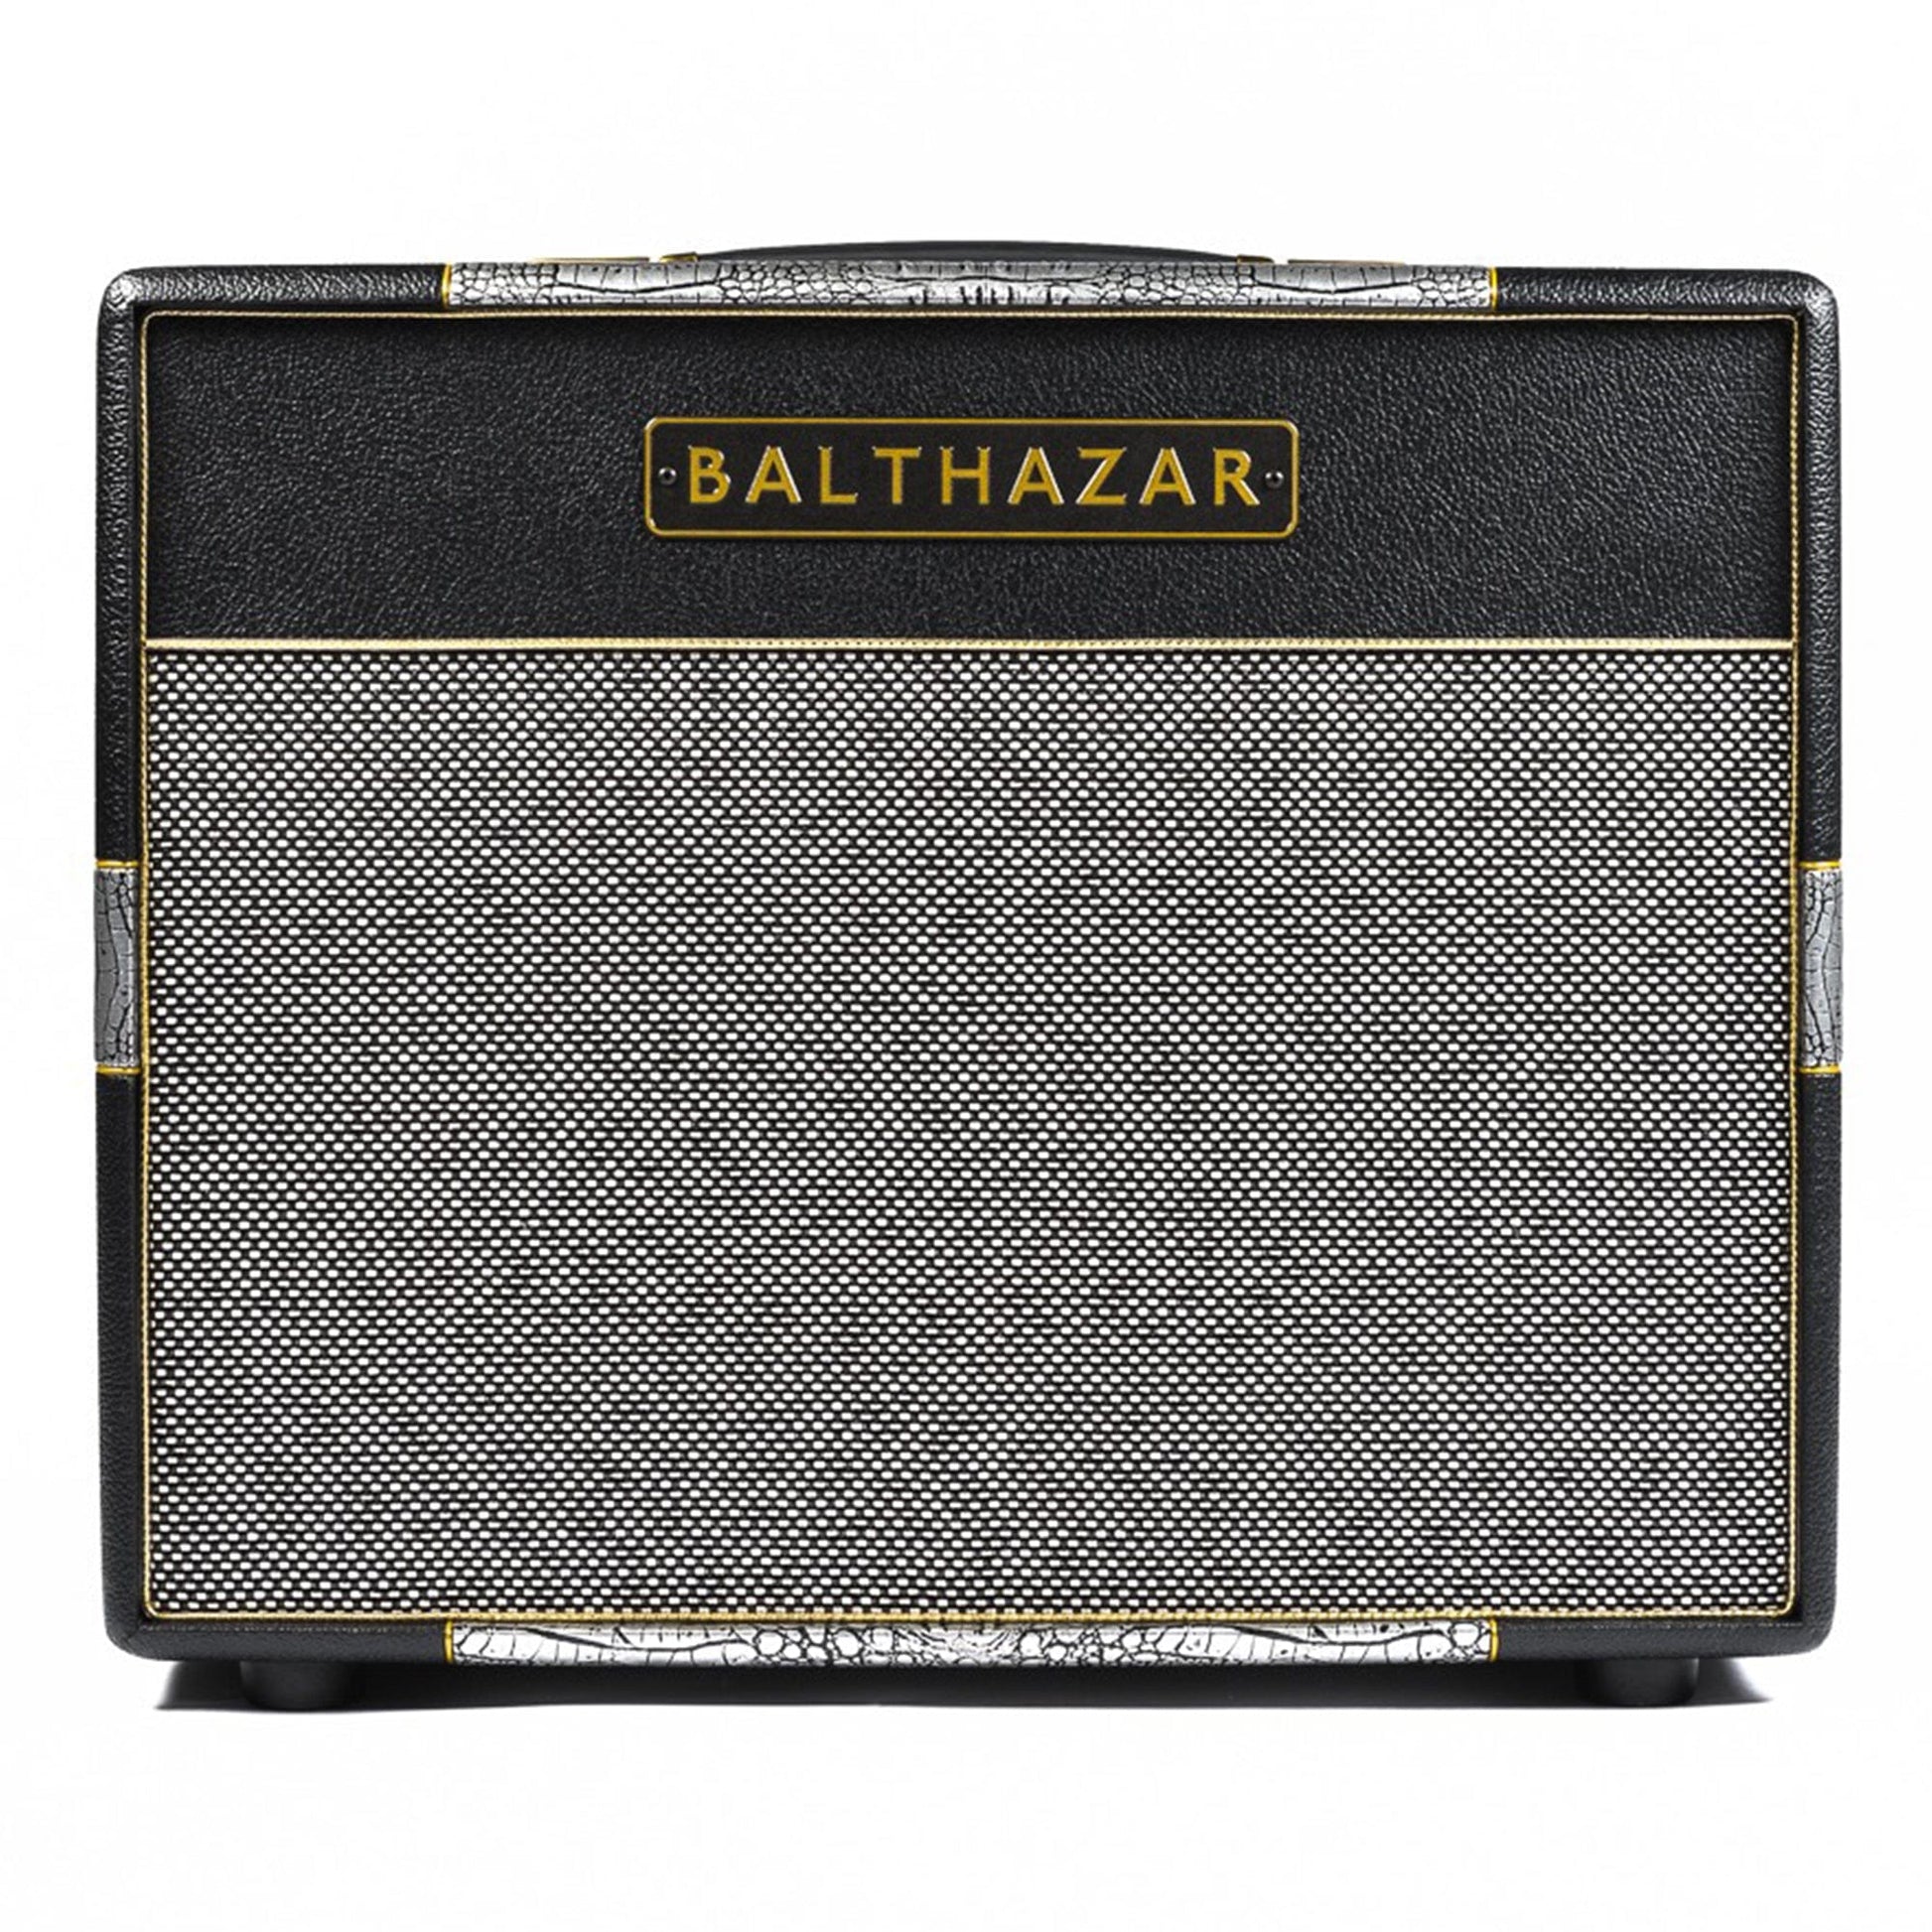 Balthazar Audio Systems Cabaret MKII 15W 1x10" Combo Croc Amps / Guitar Combos